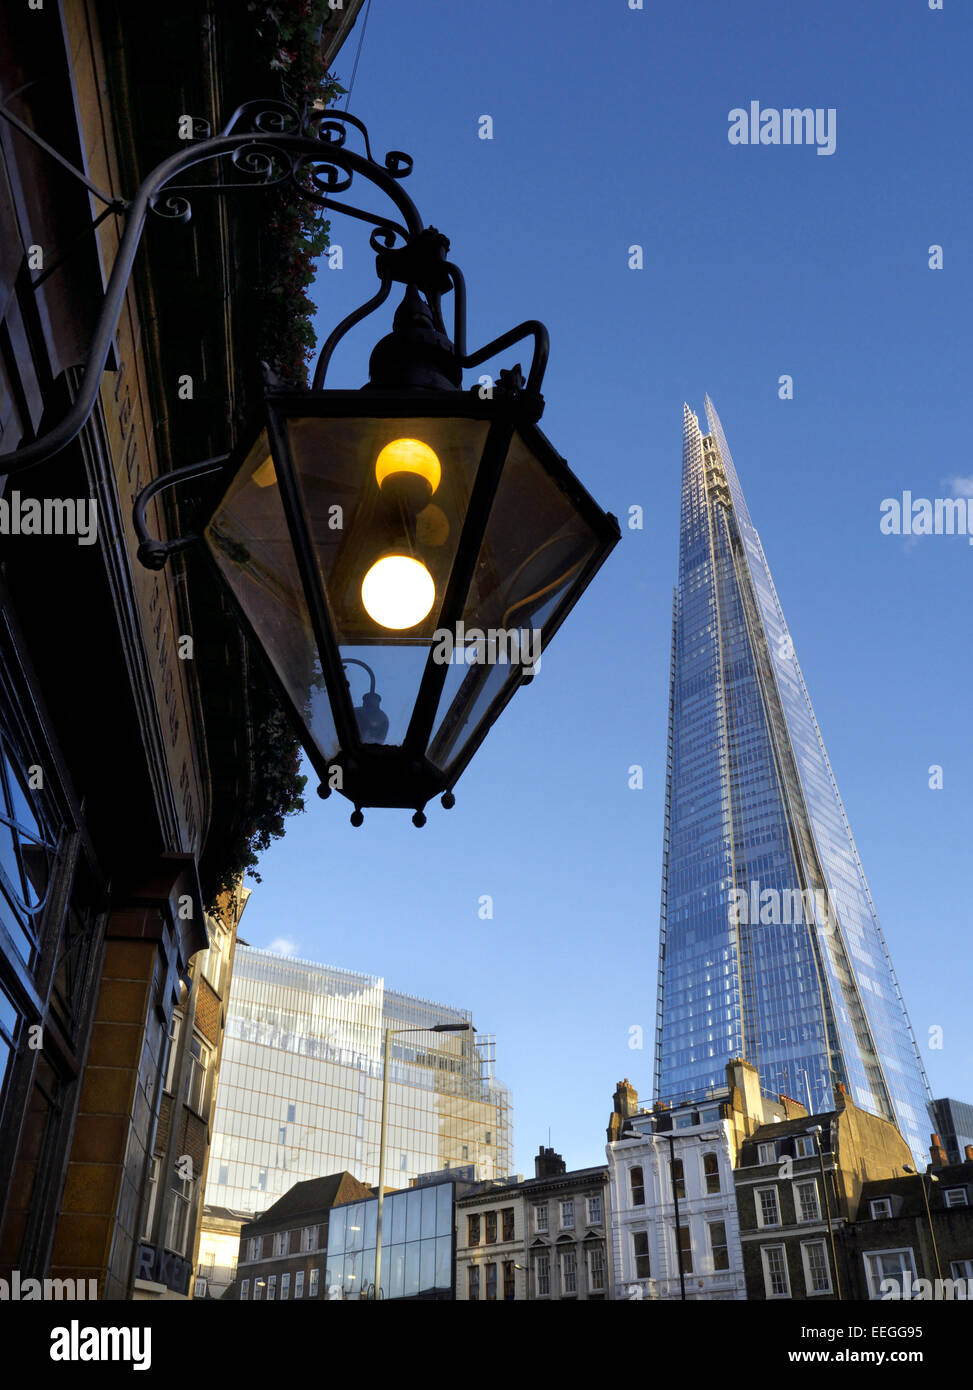 The London Shard building towering over Victorian and Georgian terraced houses, ornate public house lamp in foreground London UK Stock Photo